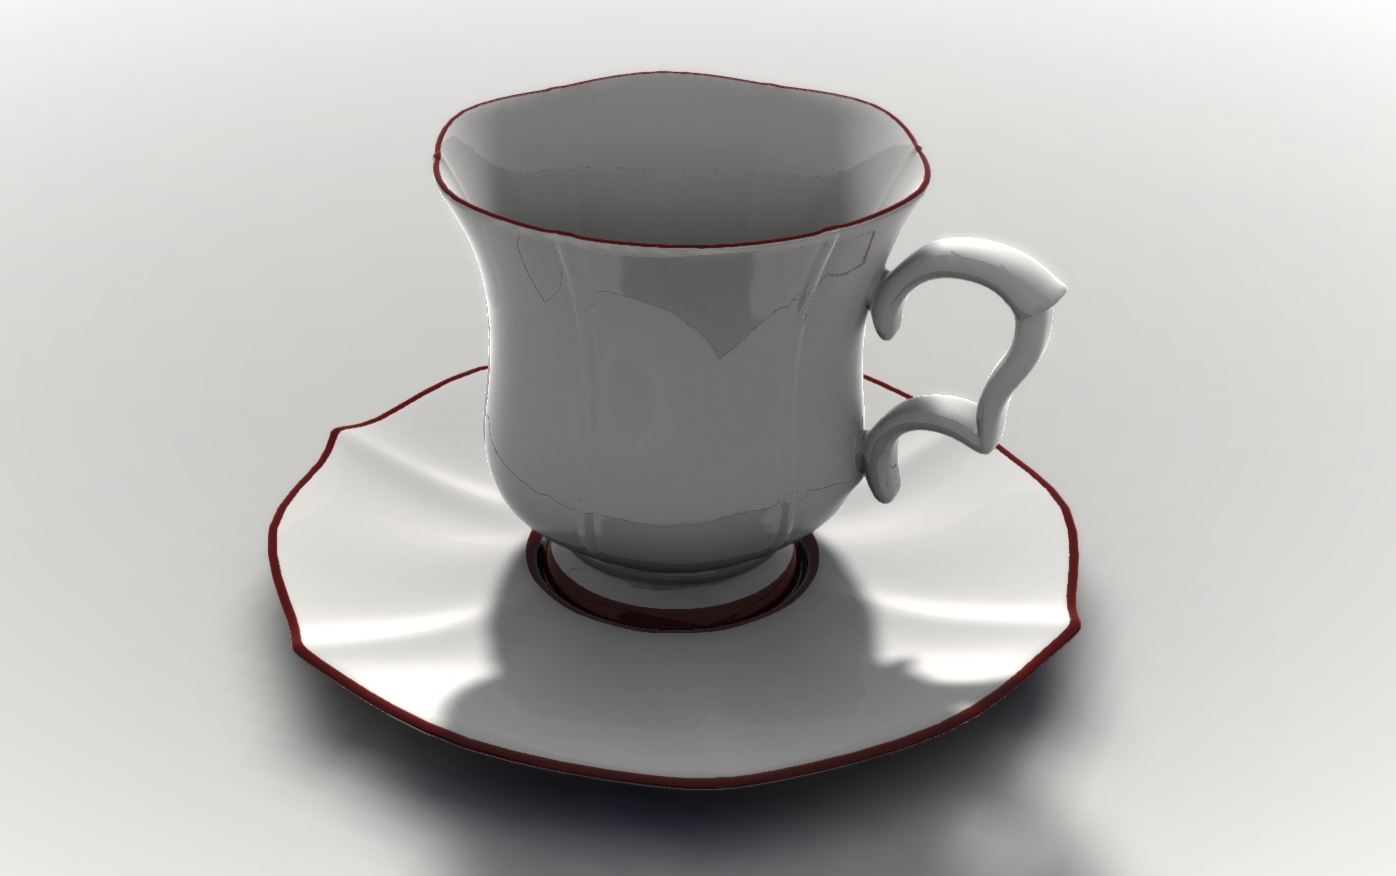 Prototype: 3D real-time representation of porcelain